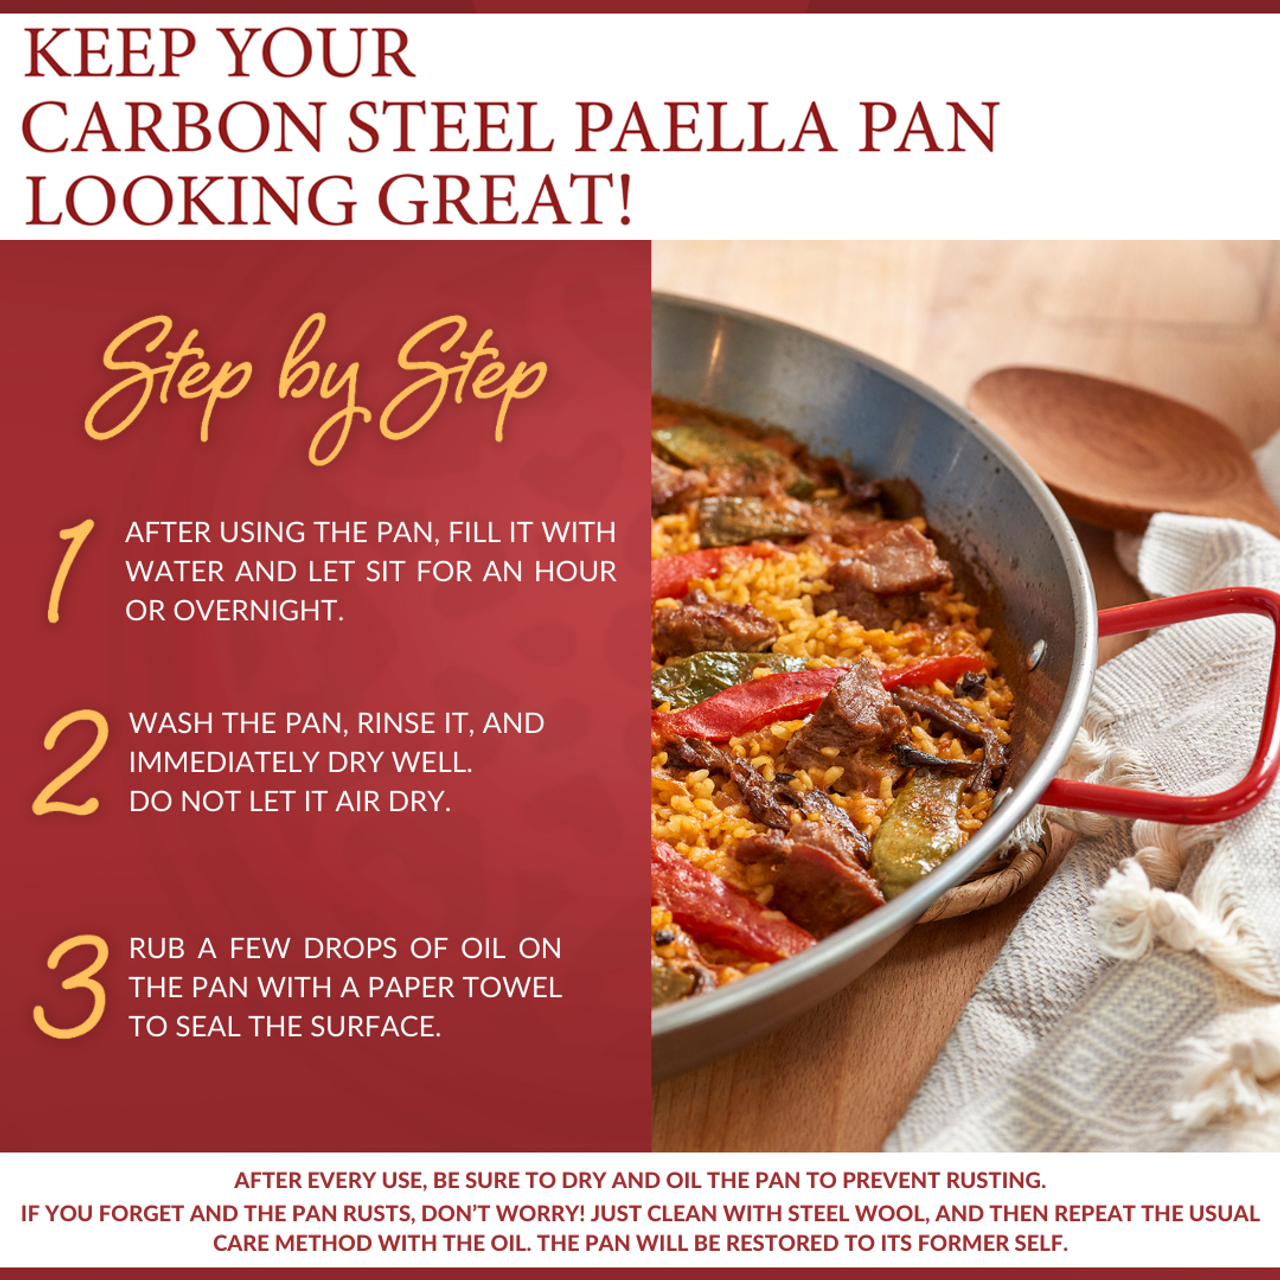 https://cdn11.bigcommerce.com/s-m3qoi99x9/images/stencil/1280x1280/products/159/1131/How_to_clean_carbon_steel_paella_pan__62693.1686940563.png?c=1